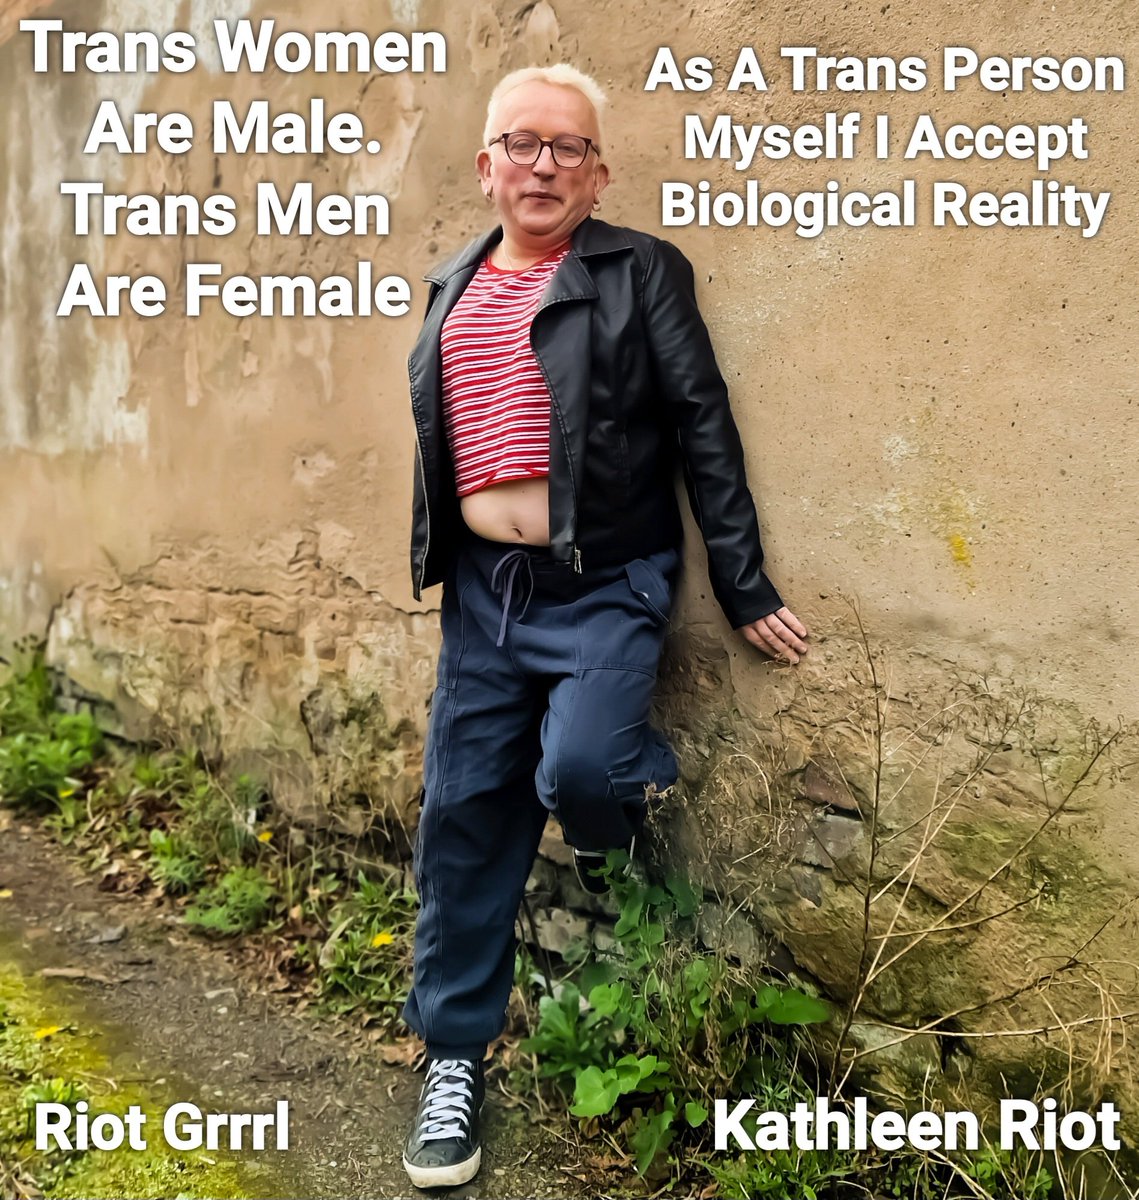 I accept biological reality. If I sleep with a man including a TW  its gay sex. If I sleep with a woman including a TM its heterosexual sex. I abstain from relationships now but in the past enjoyed sex with men, women and some of those using other identies. #biologymatters.